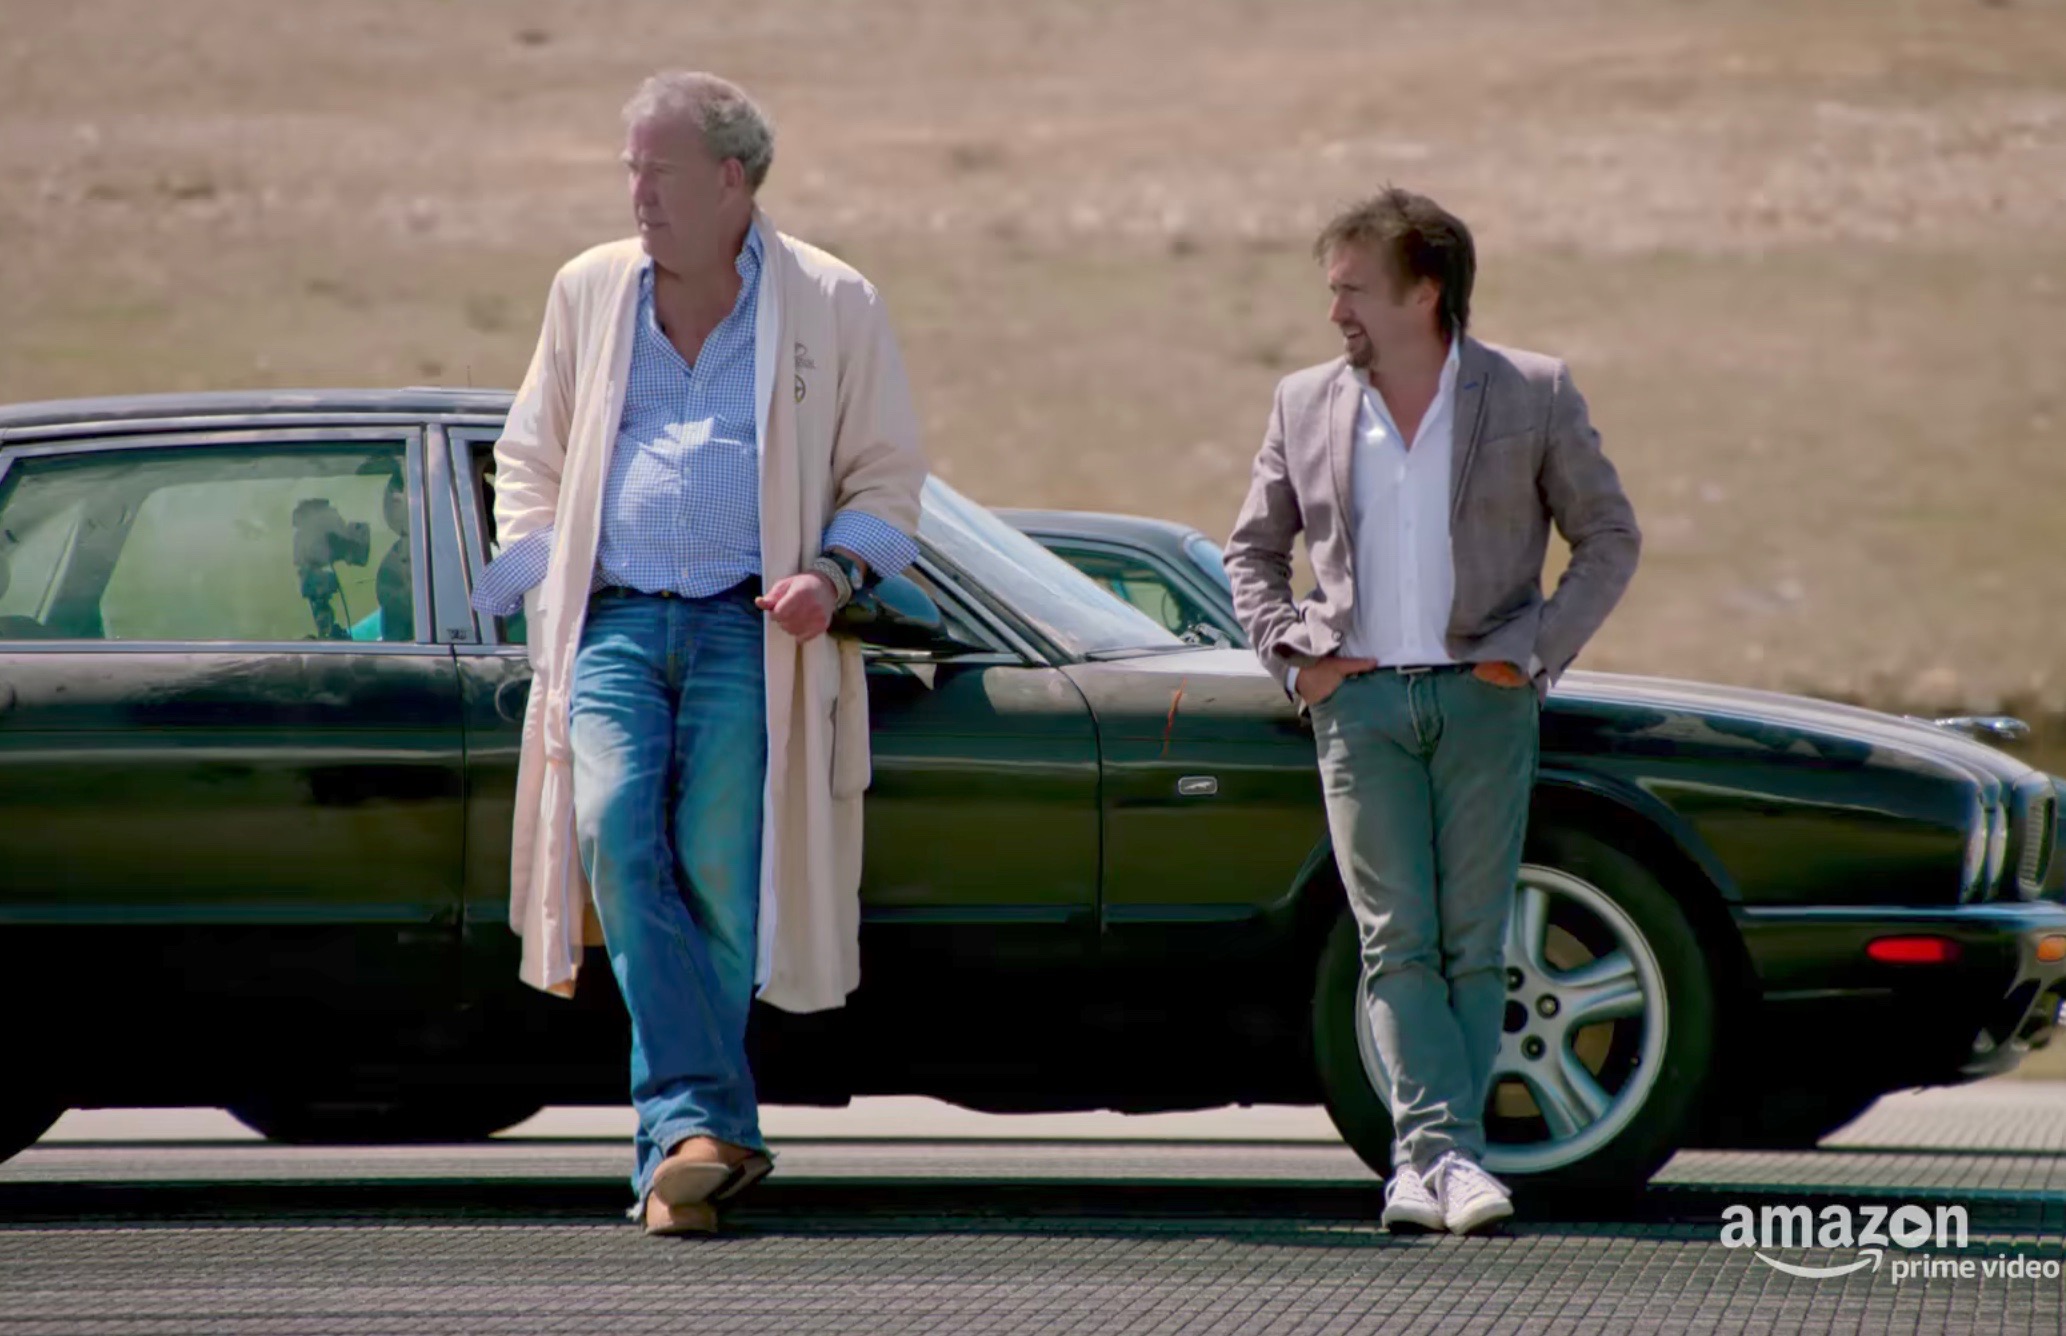 Video The Grand Tour season 2 trailer released, goes live December 8